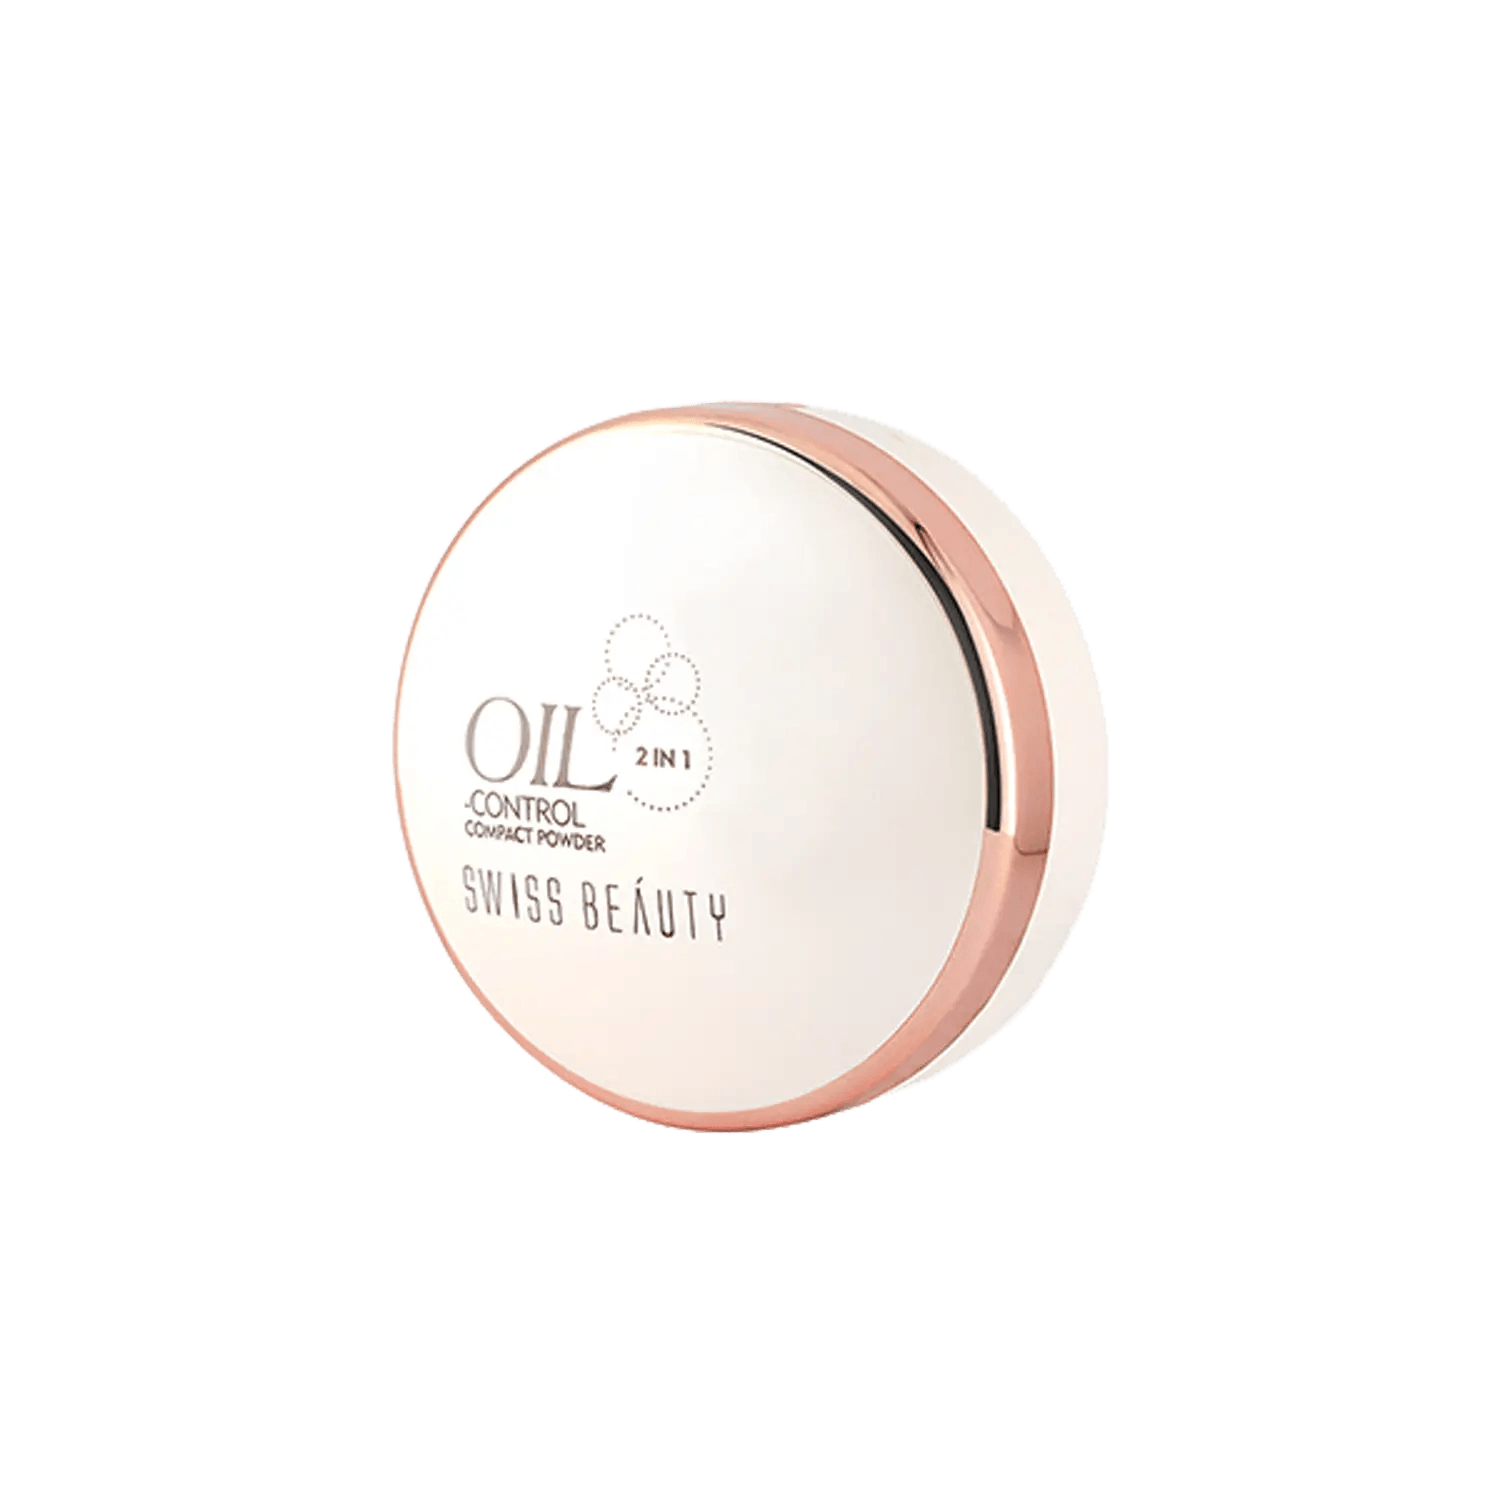 Swiss Beauty | Swiss Beauty Oil Control Compact Powder - 03 Natural Nude (20g)